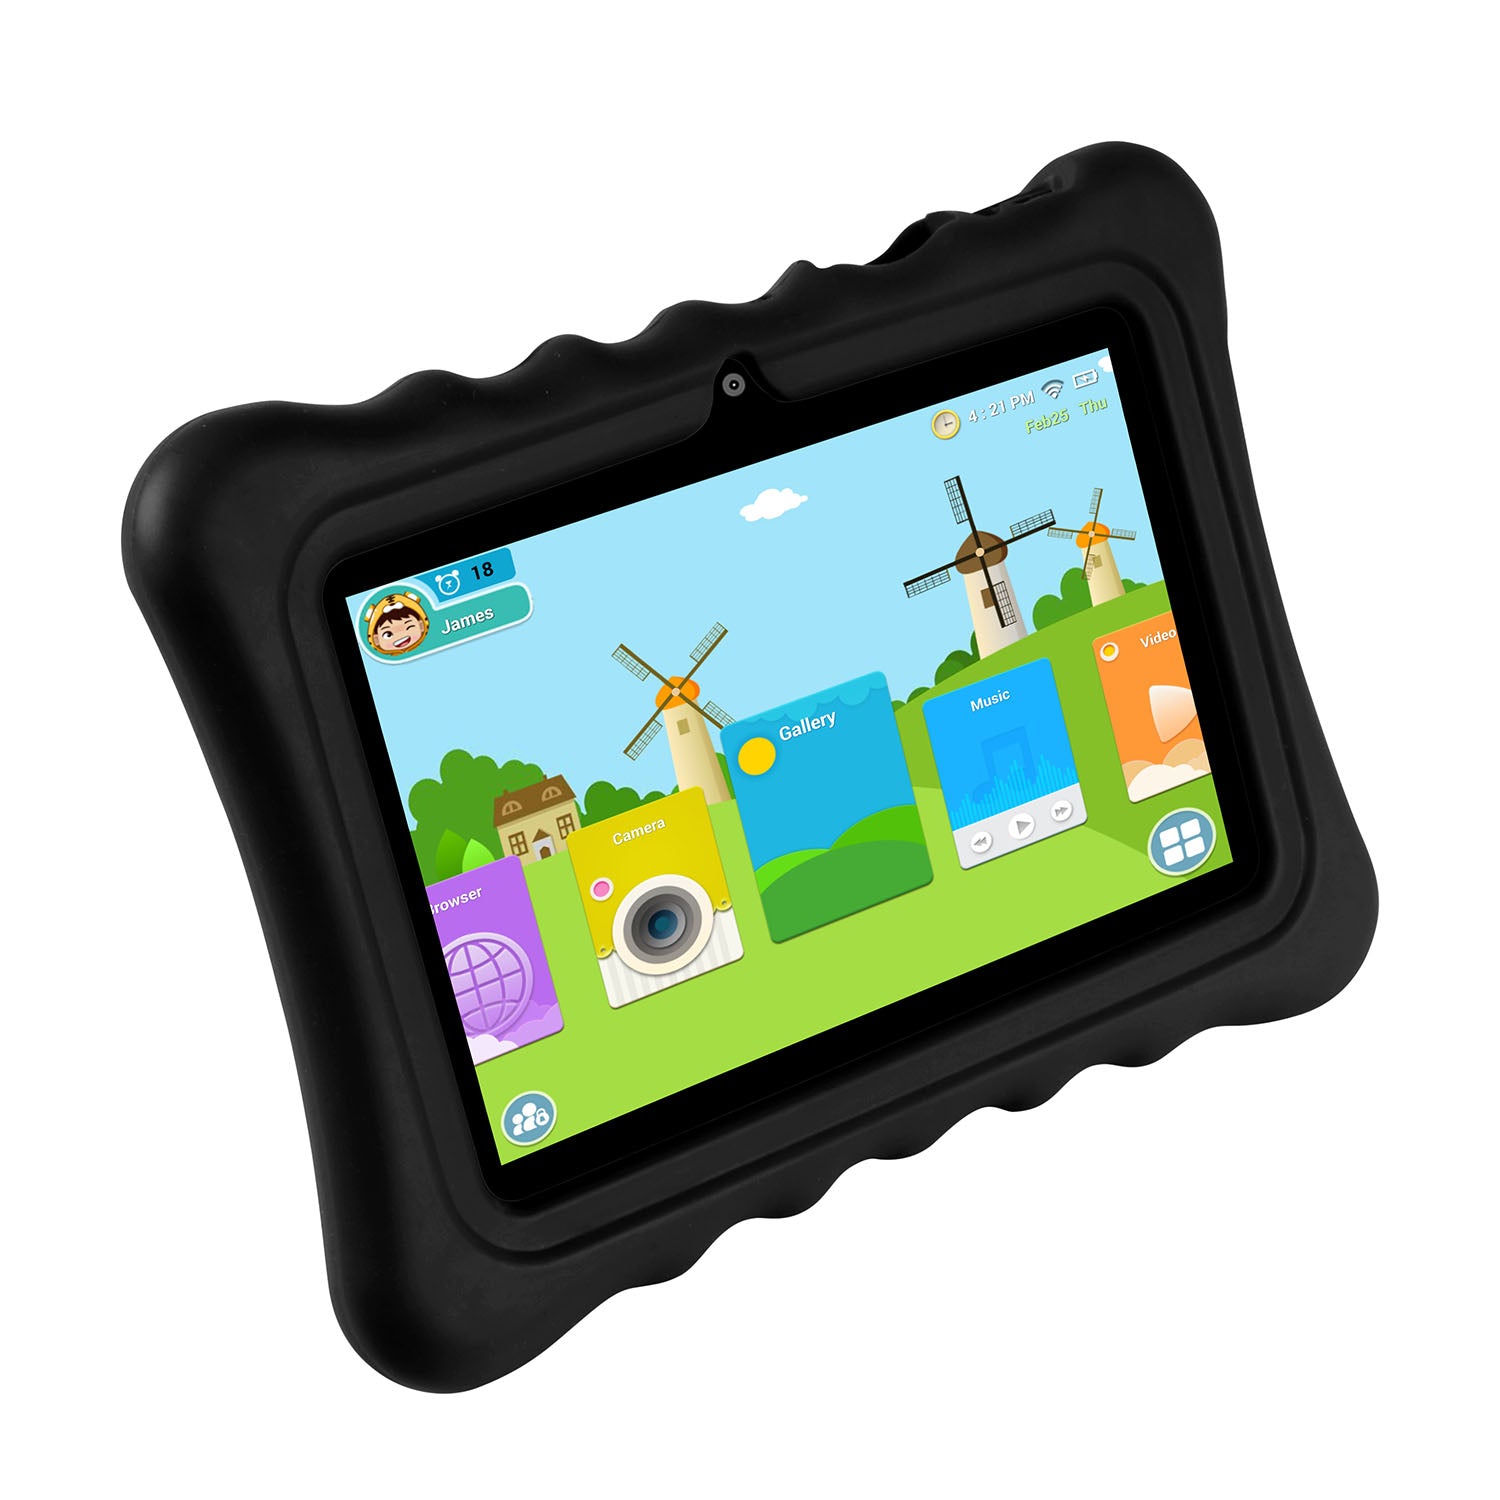 title:Shock-resistant Silicone Snap-on Case with Stand for 7” Tablets;color:Black